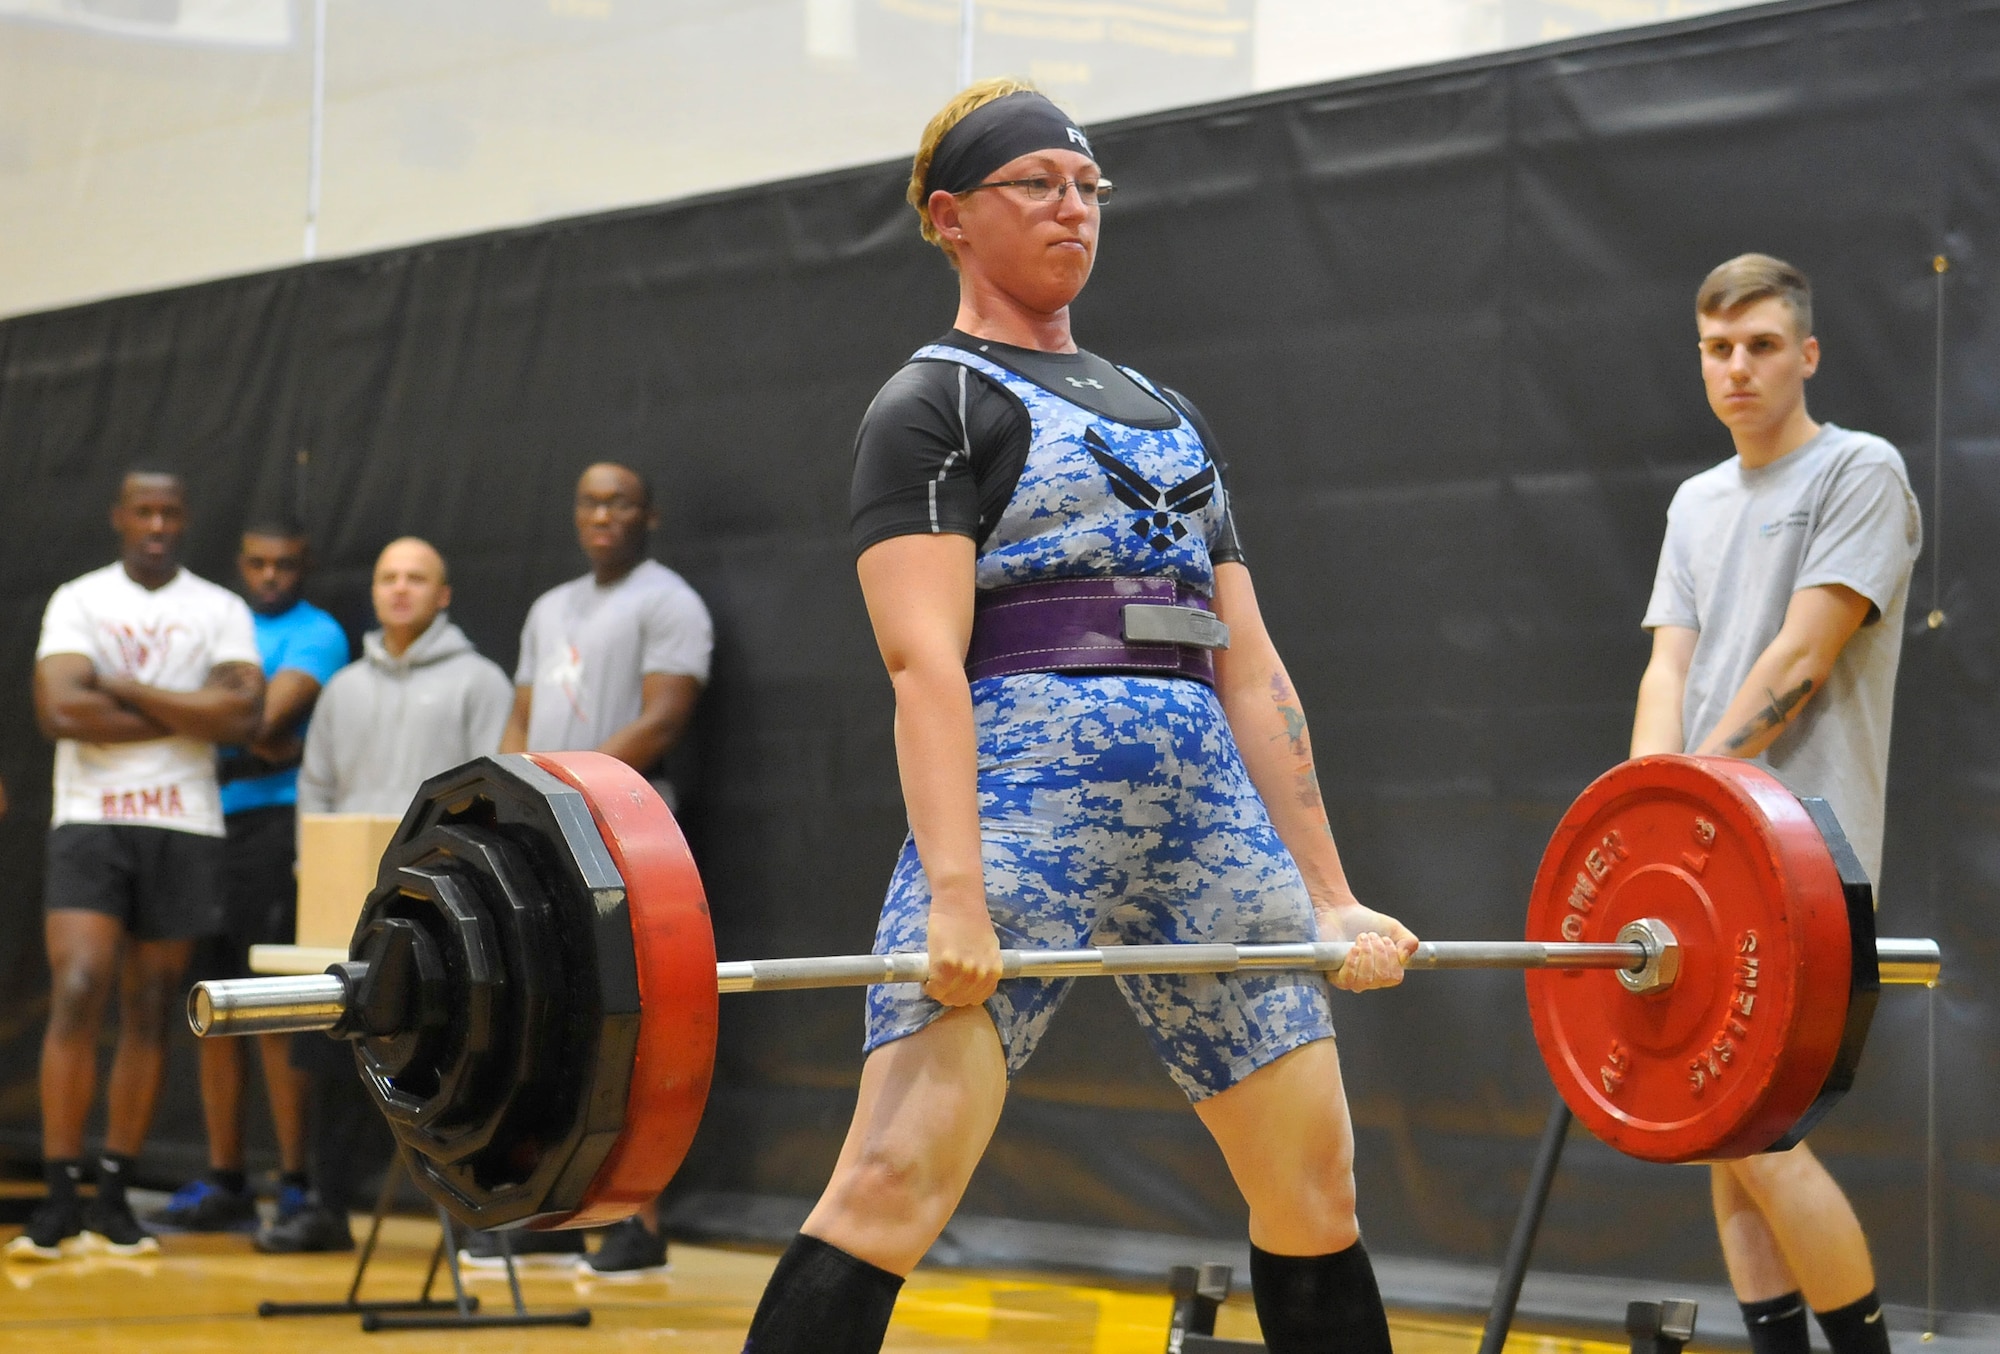 Staff Sgt. April Spilde competes in the deadlift portion of the push, pull and curl competition at Joint Base Myer-Henderson Hall, Va., April 9, 2016. Spilde finished second in her weight class, deadlifting 300 pounds, bench pressing 175 pounds and curling 75 pounds. (U.S. Navy photo/Petty Officer 2nd Class Christopher Hurd)